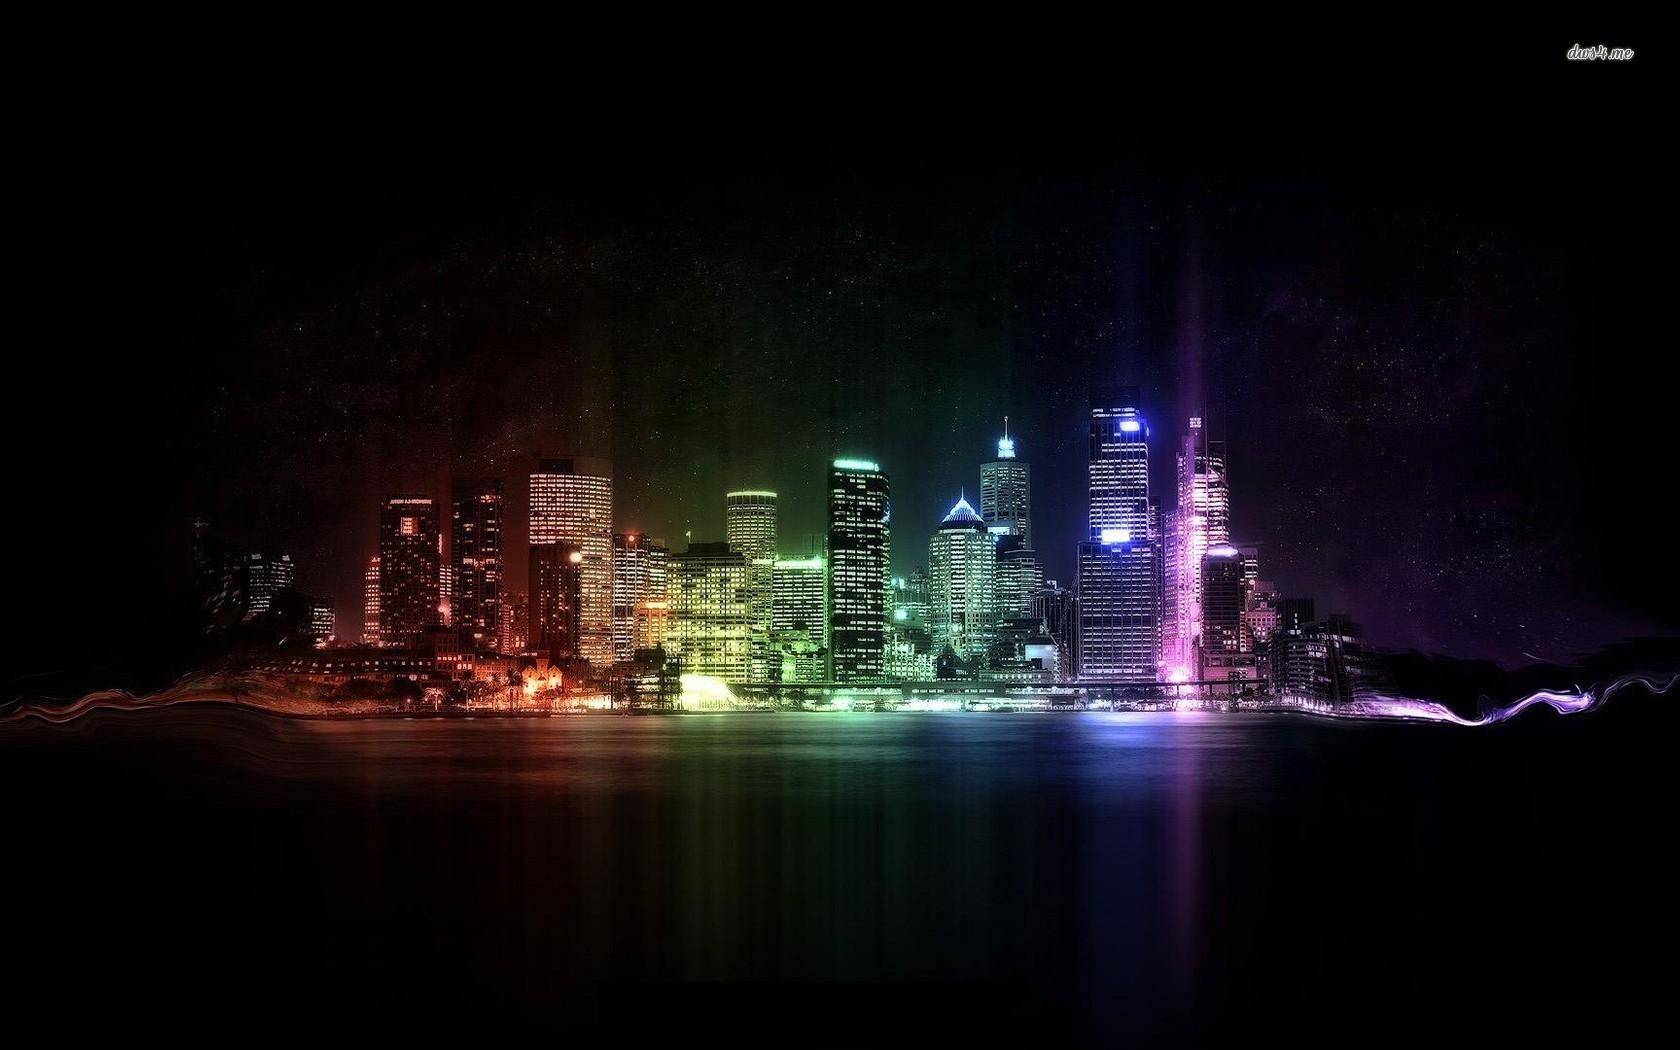 Cool Neon City Lights Wallpapers - Top Free Cool Neon City Lights